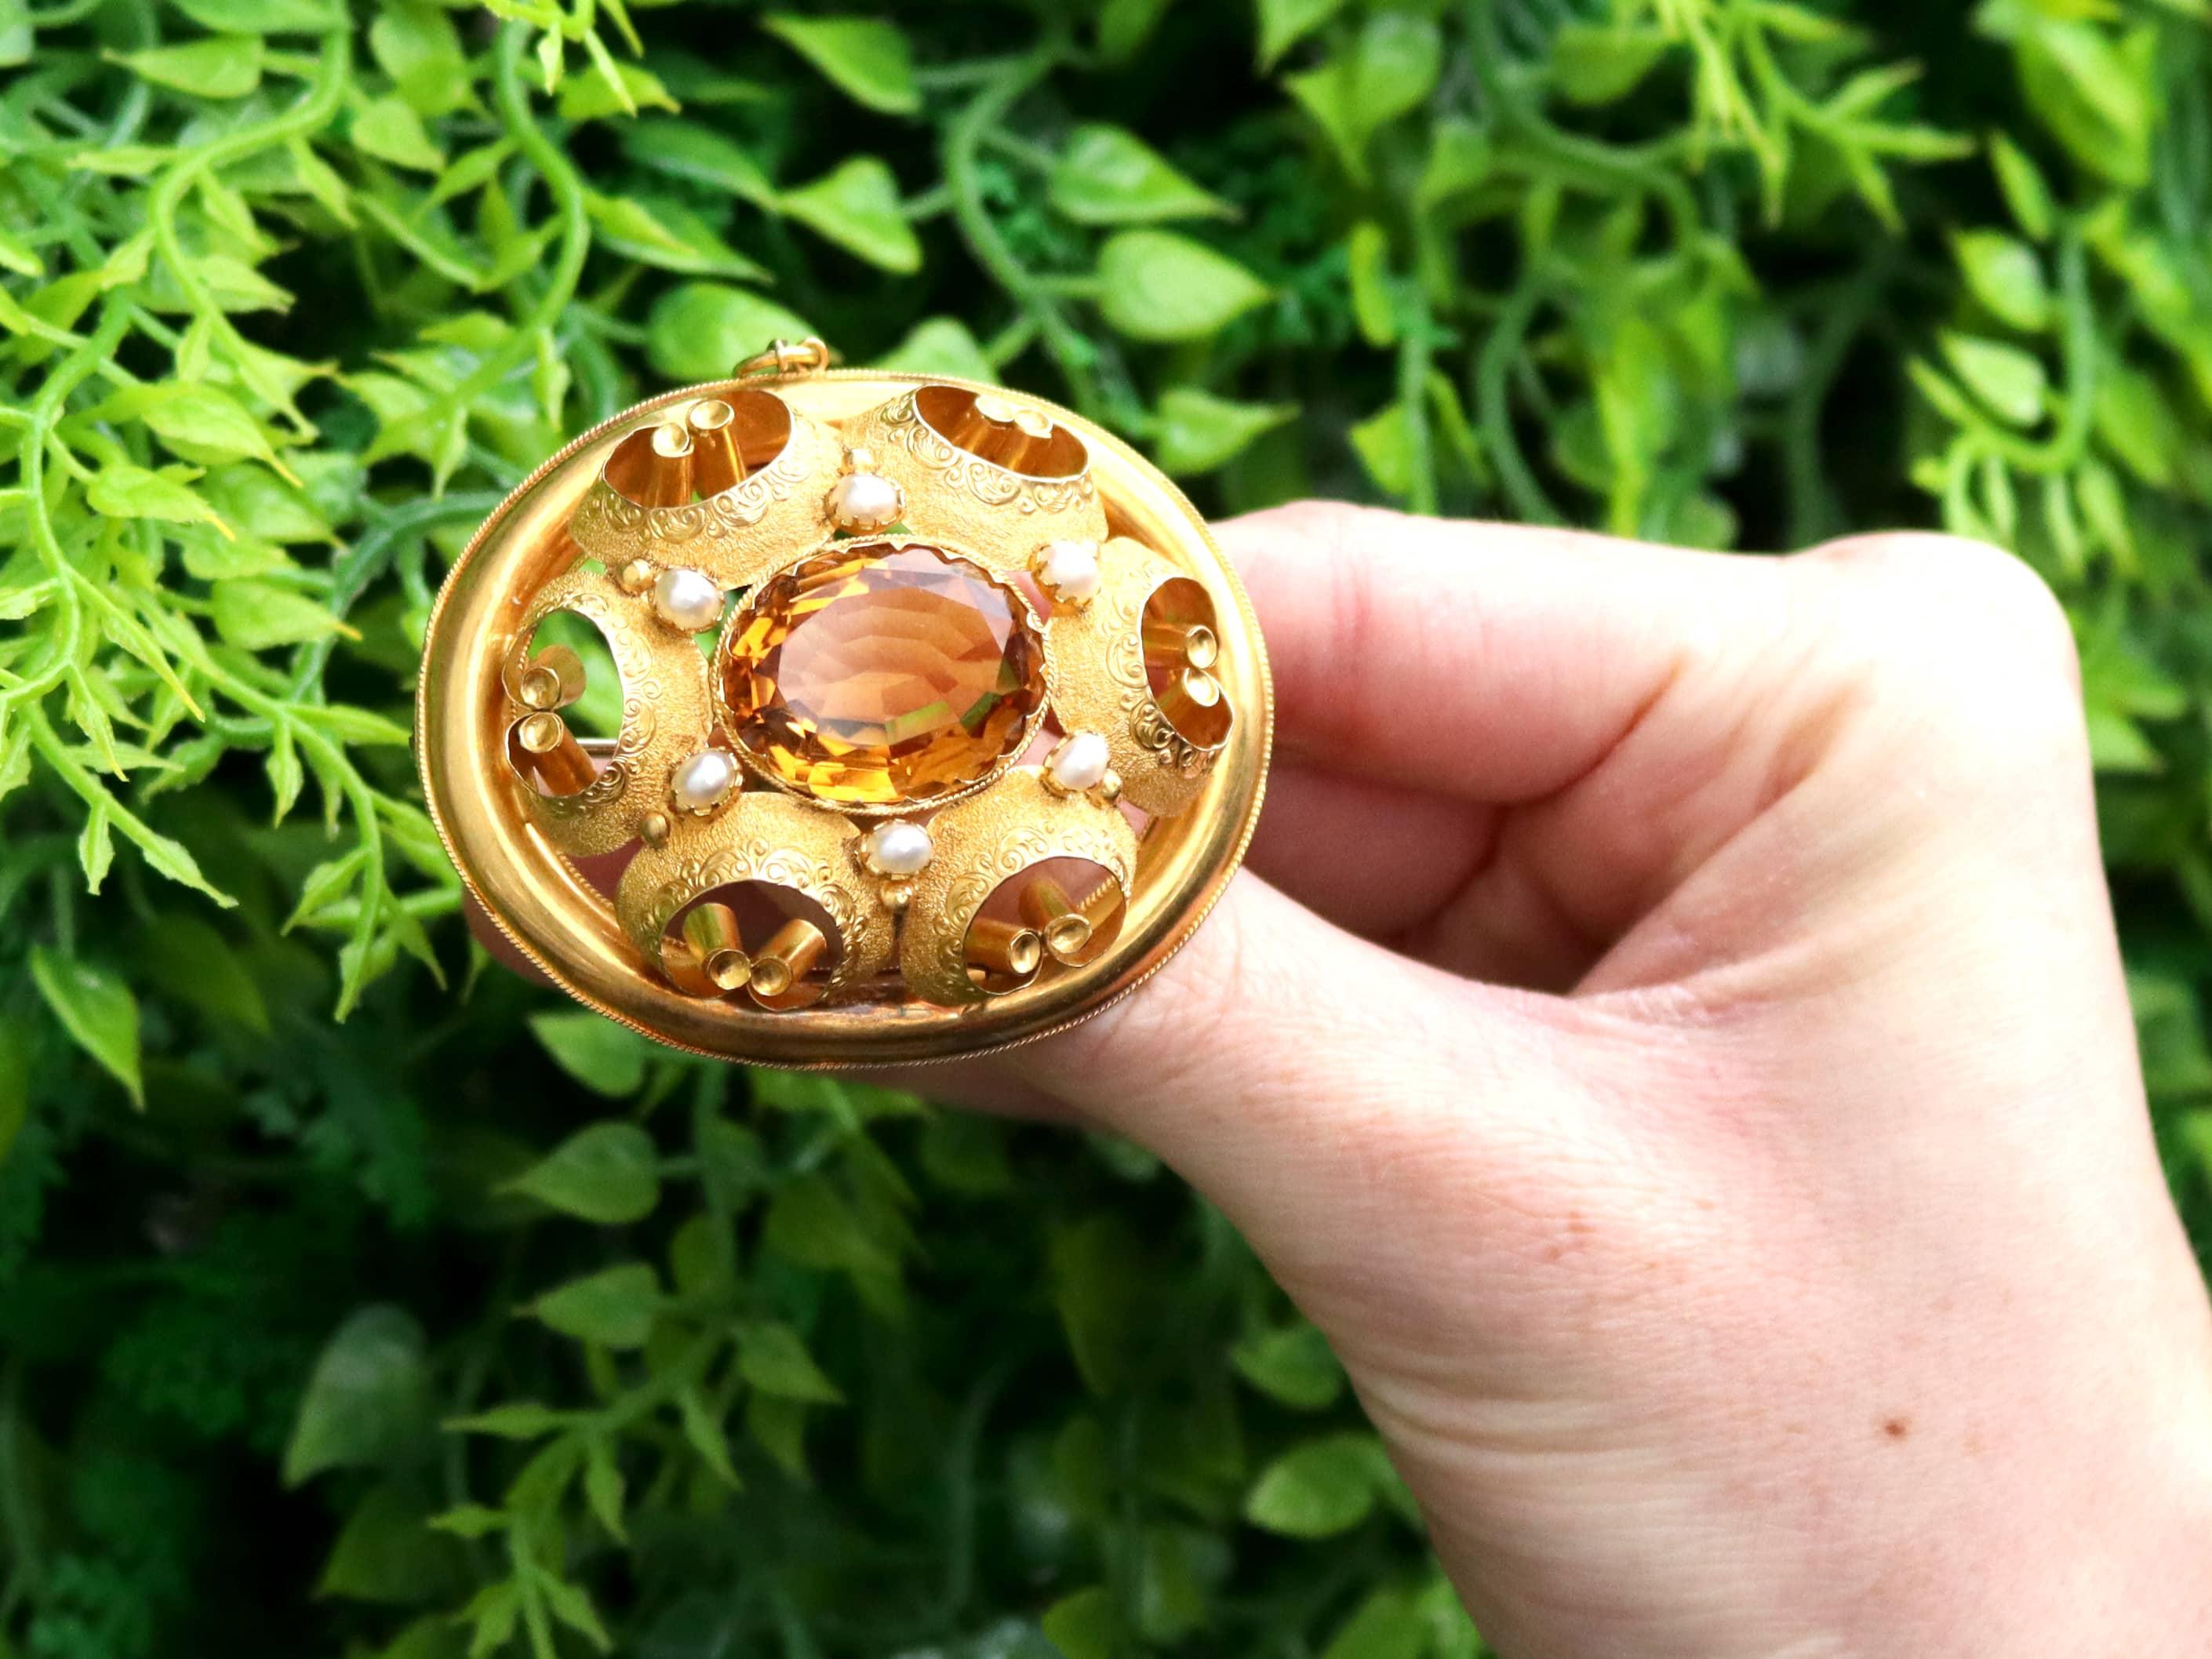 A stunning, fine and impressive, large antique Victorian 14.32 carat citrine and natural pearl, 20 karat yellow gold brooch; part of our diverse antique jewelry and estate jewelry collections

This stunning and large Victorian brooch has been